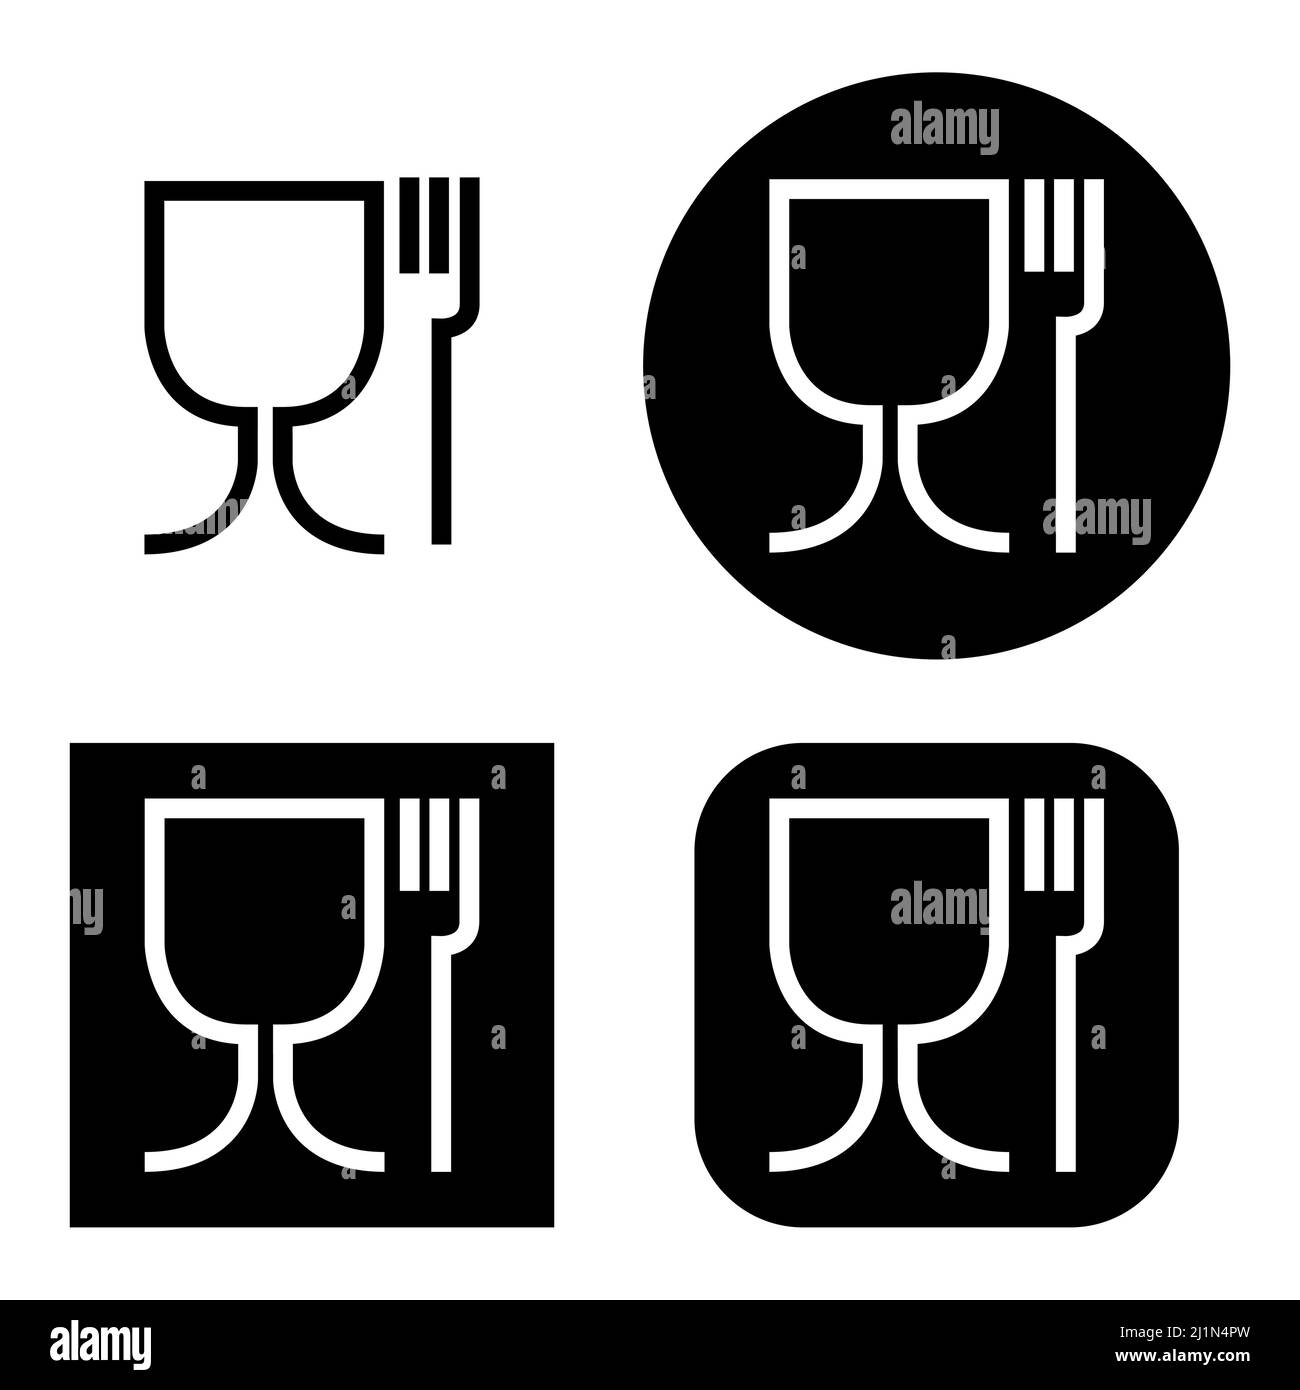 Set of Food safe symbol. The international icon for food safe material, wine glass and a fork symbol . Stock Vector